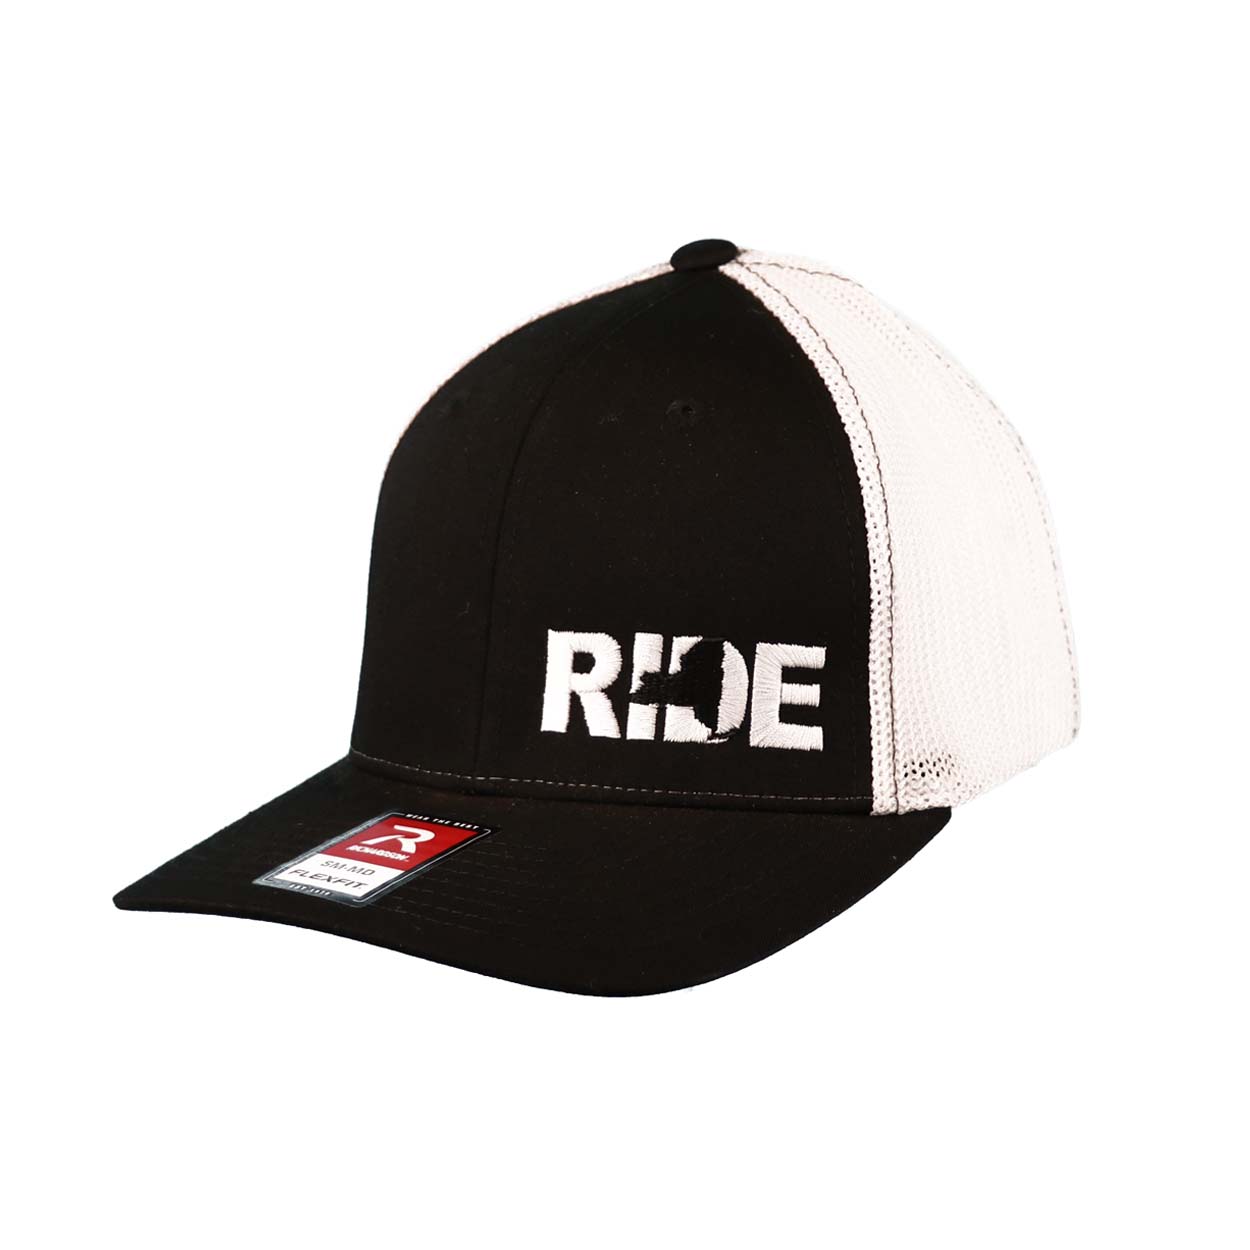 Ride New York Classic Pro Night Out Embroidered Flex Fit Trucker Hat Black/White